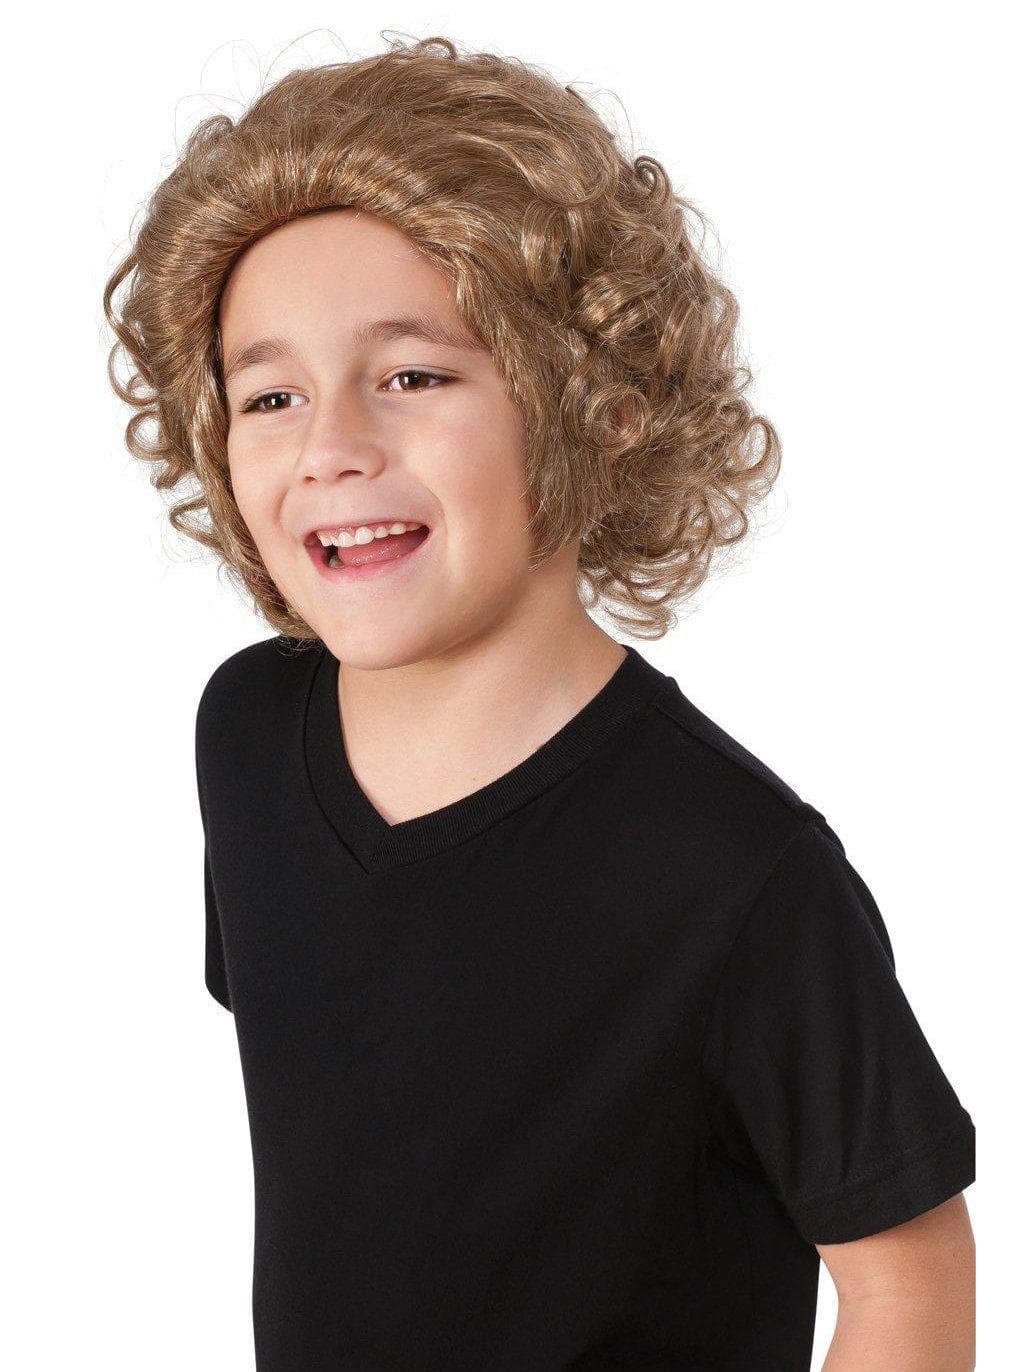 Boys' Charlie and the Chocolate Factory Willie Wonka Wig - costumes.com